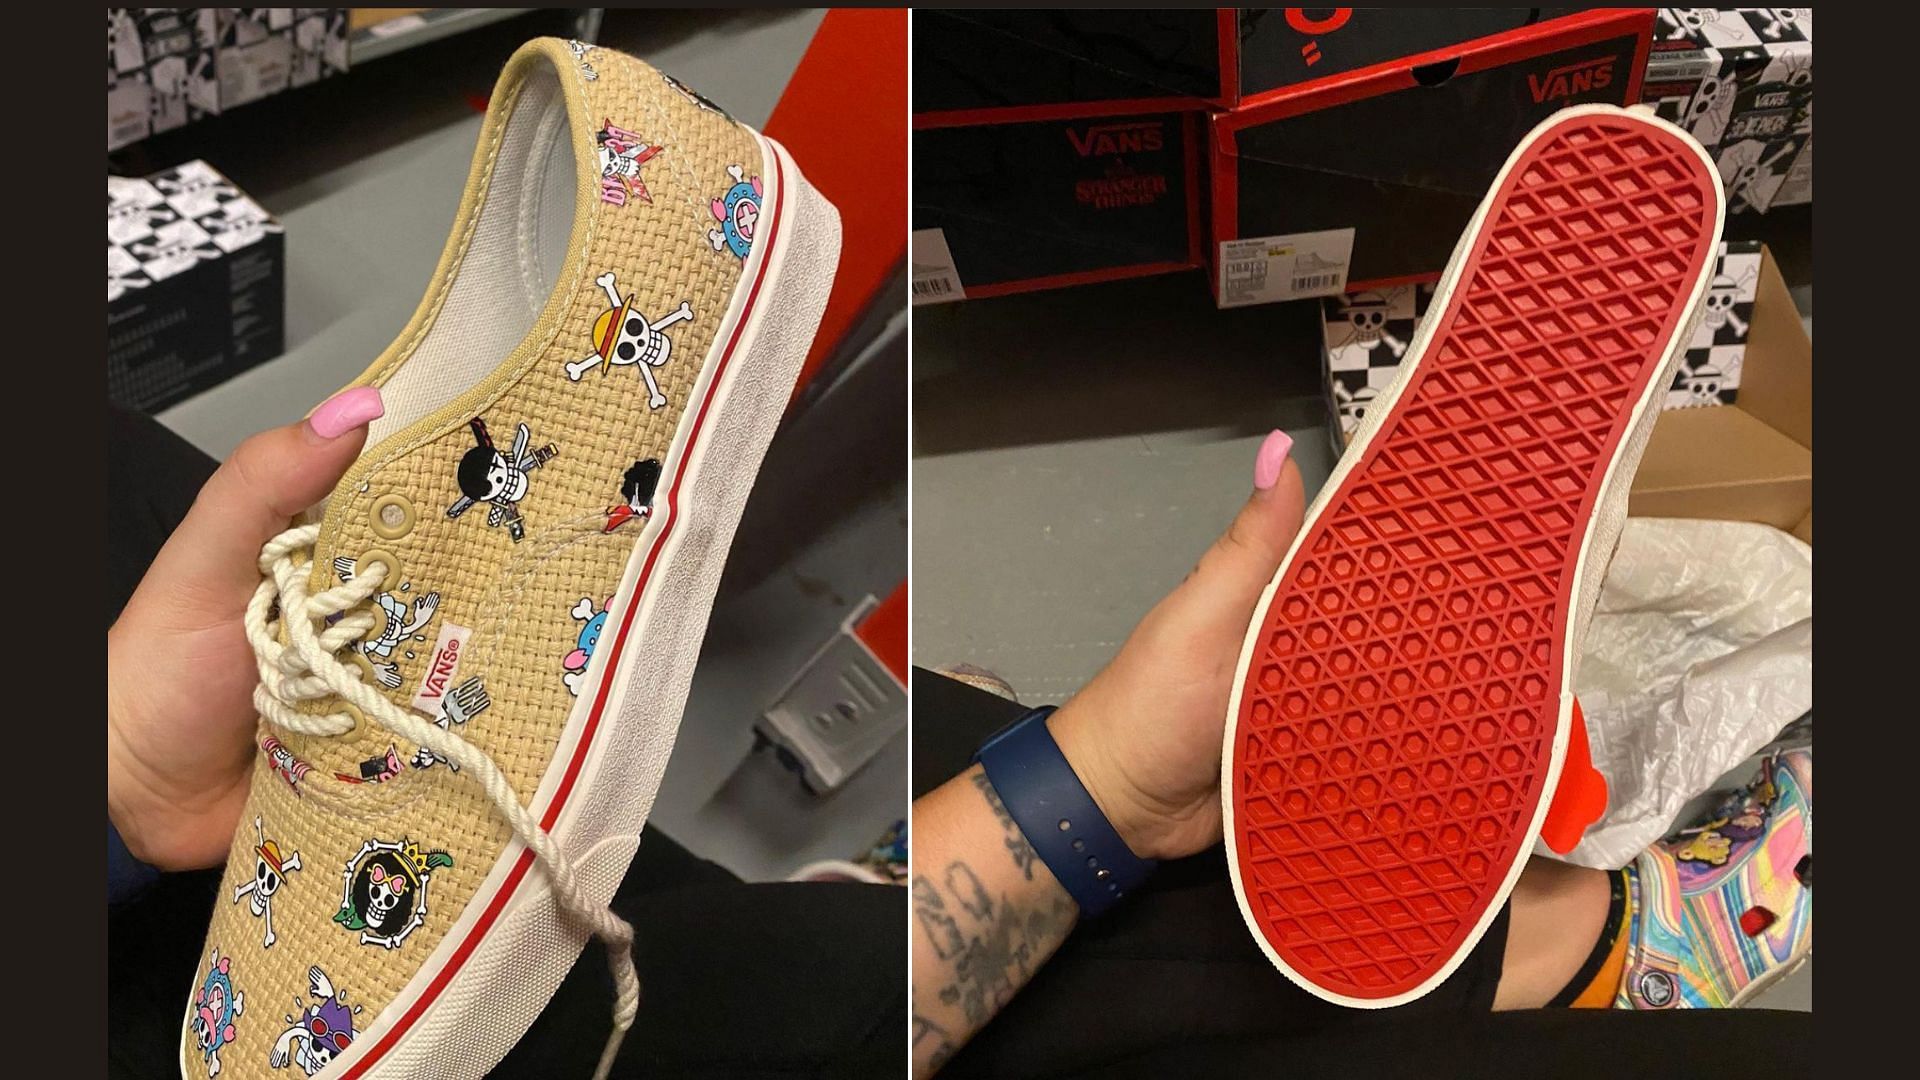 Upcoming One Piece x Vans Authentic sneakers, an ode to the Straw Hat crew (Image via @ovrnundr.io / Instagram)